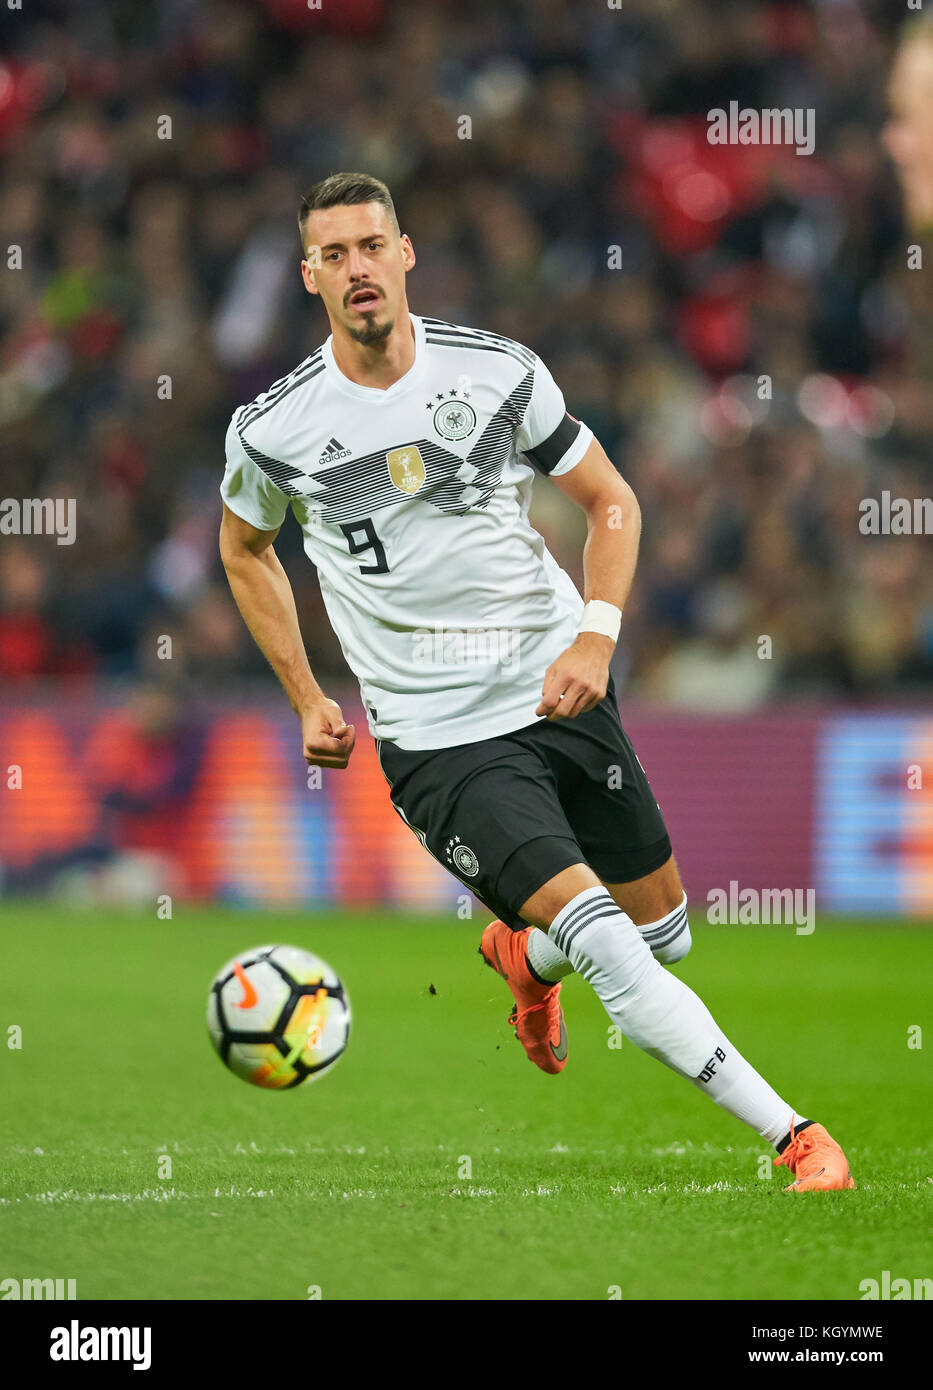 Soccer Friendly Match London November 10 17 Sandro Wagner Dfb 9 Drives The Ball Action Full Size Foto Montage England Germany 0 0 World Cup 18 Preparation Match In Wembley London United Kingdom